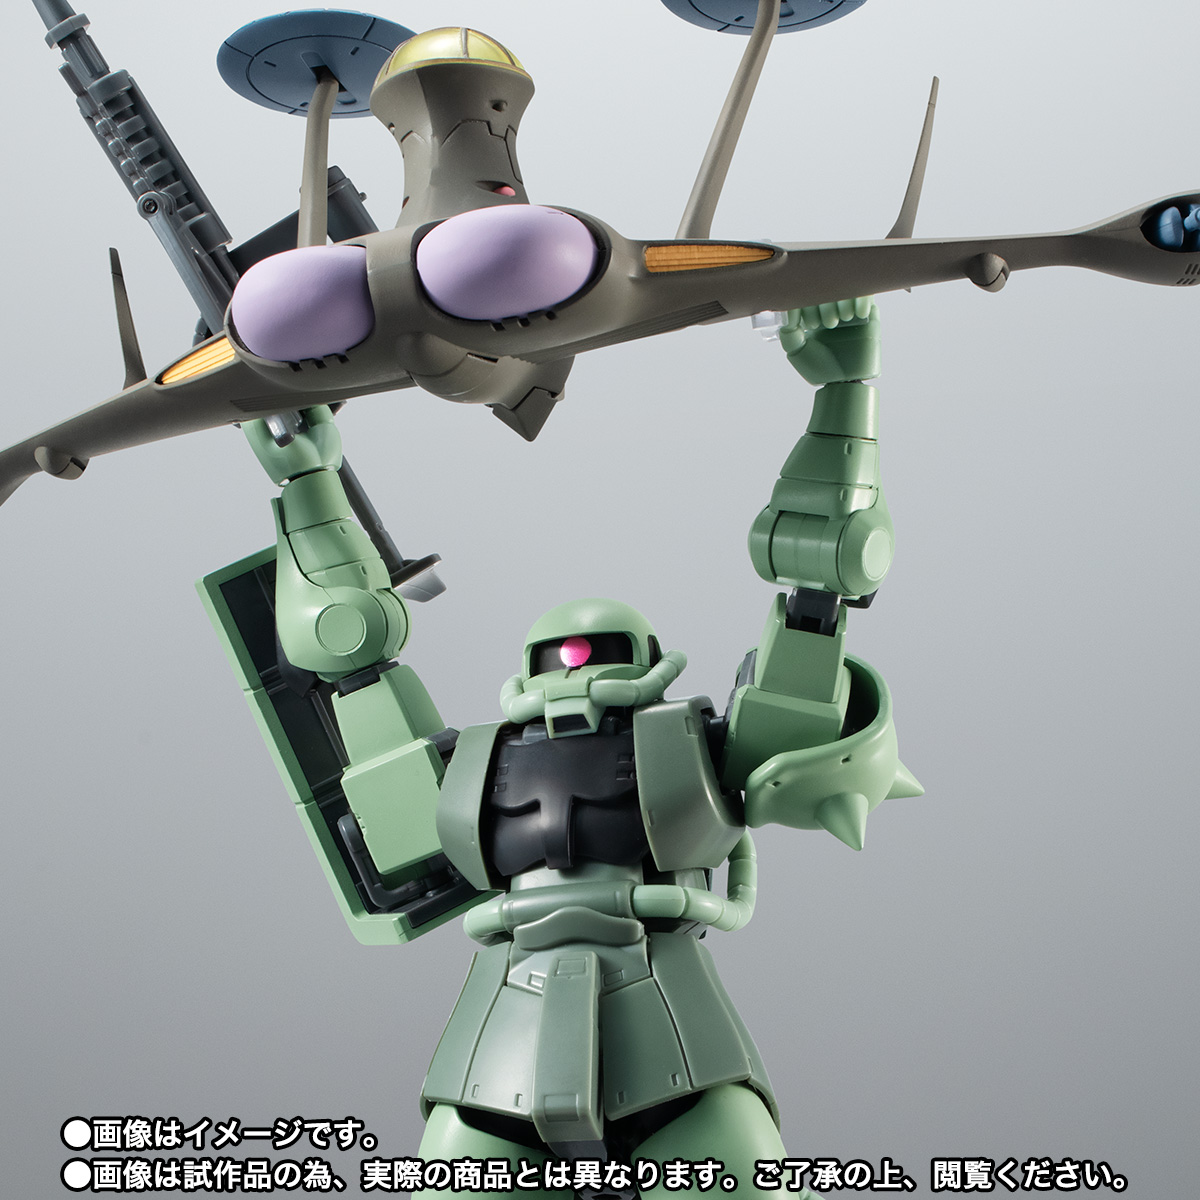 ROBOT魂 ＜SIDE MS＞ ザクll＆ジオン公国軍偵察機セット ver. A.N.I.M.E. 01